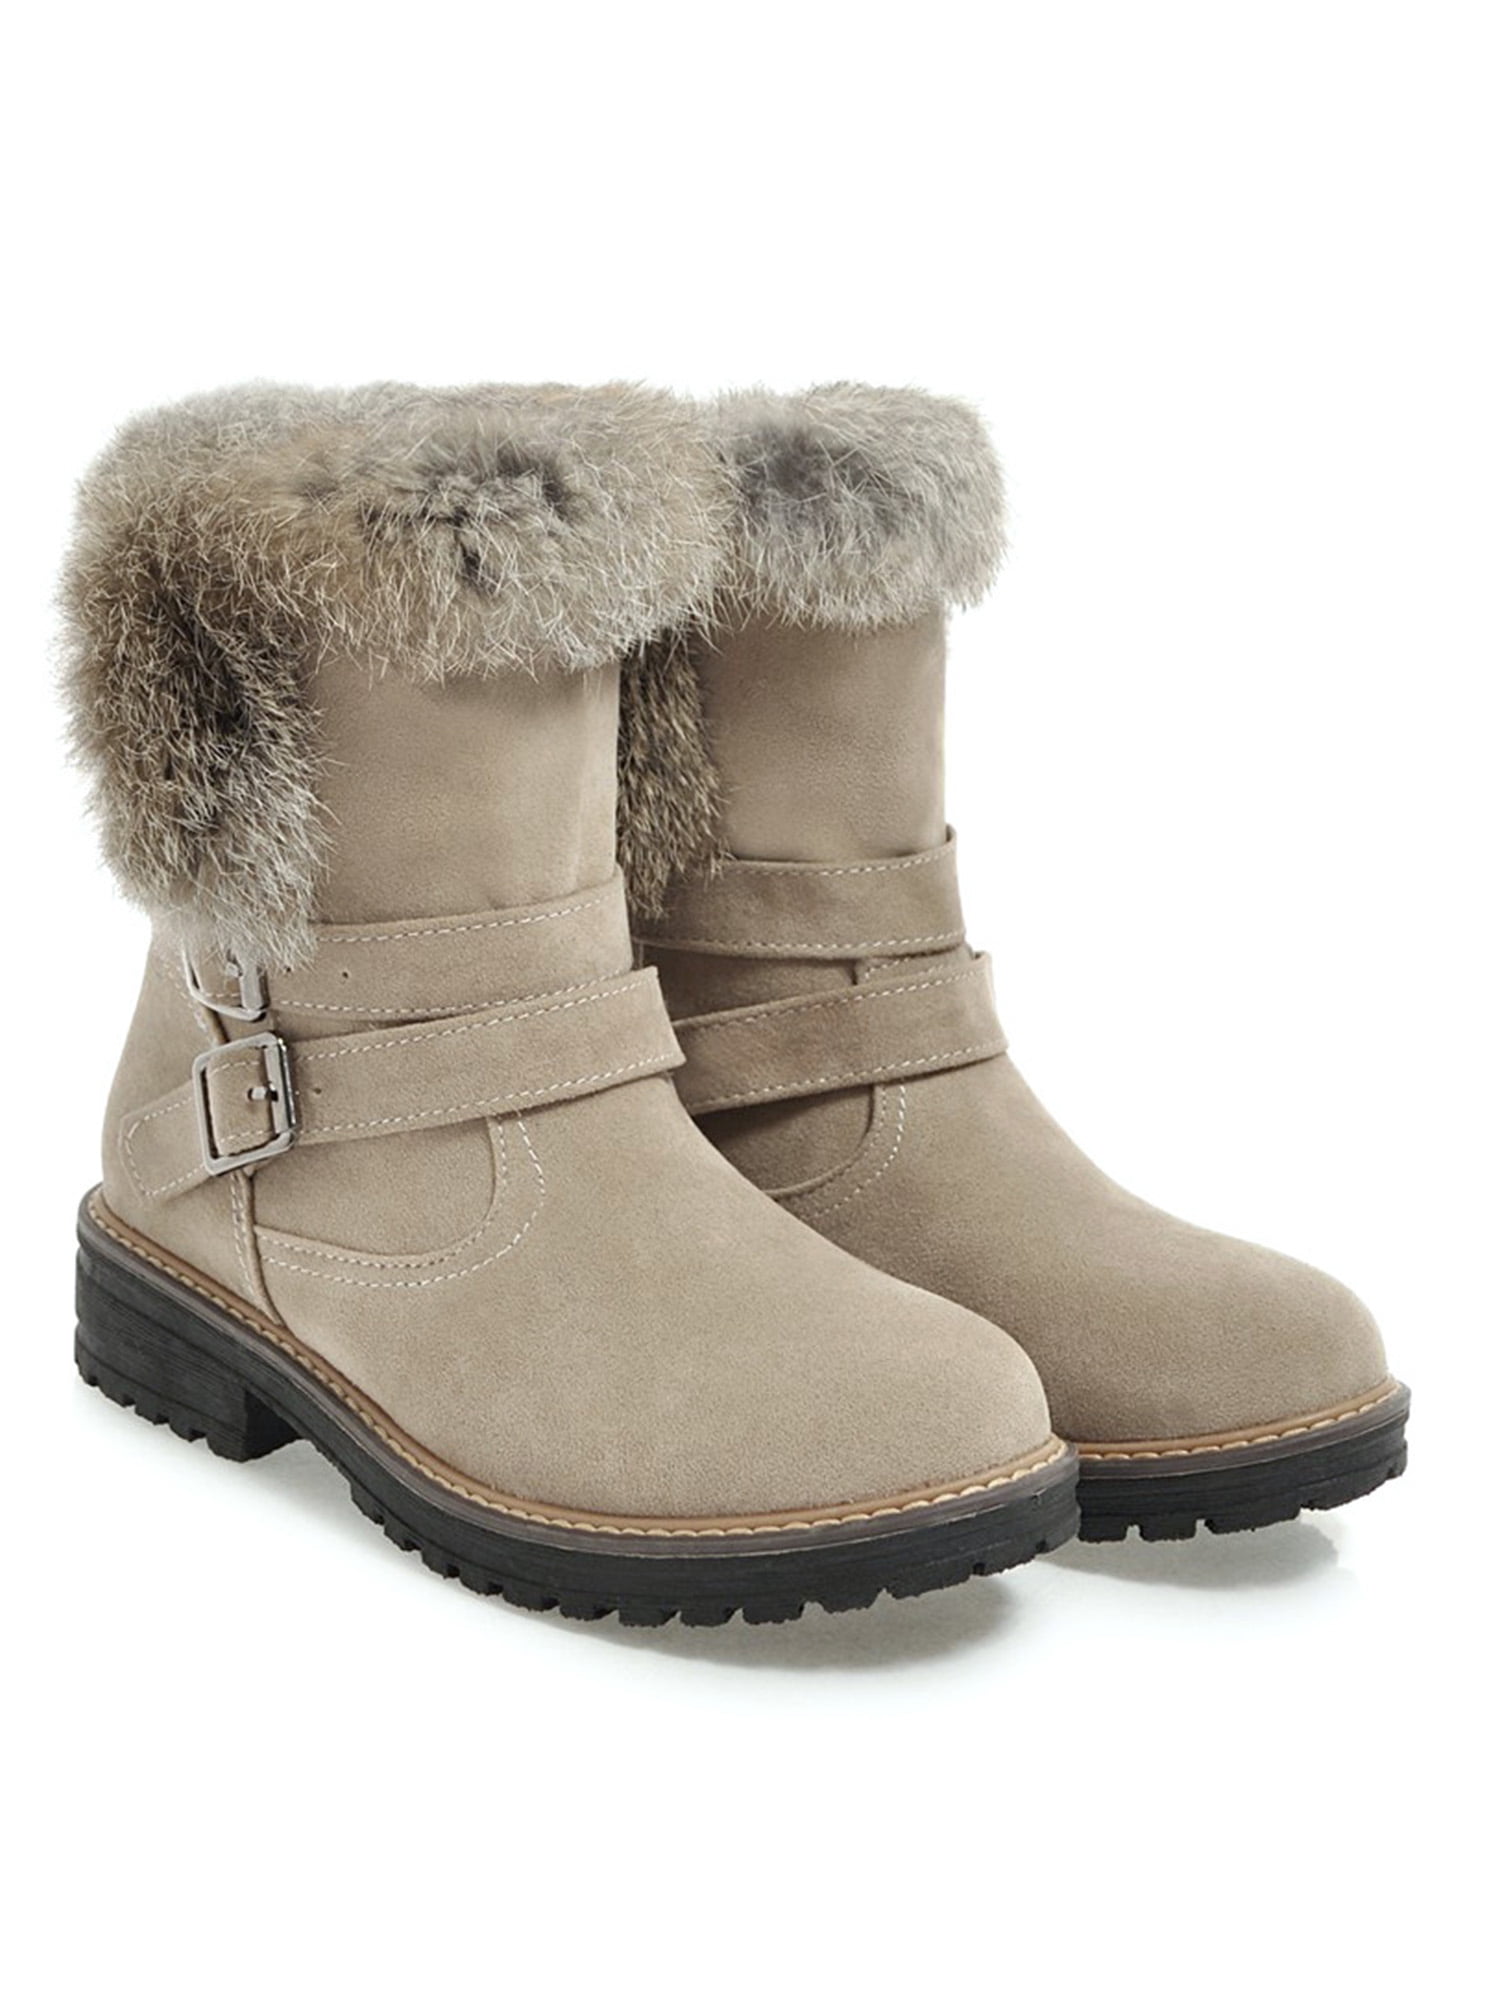 Women Warm Faux Fur Chunky Ankle Boots High Block Heel Buckle Zip Up Plush Shoes 